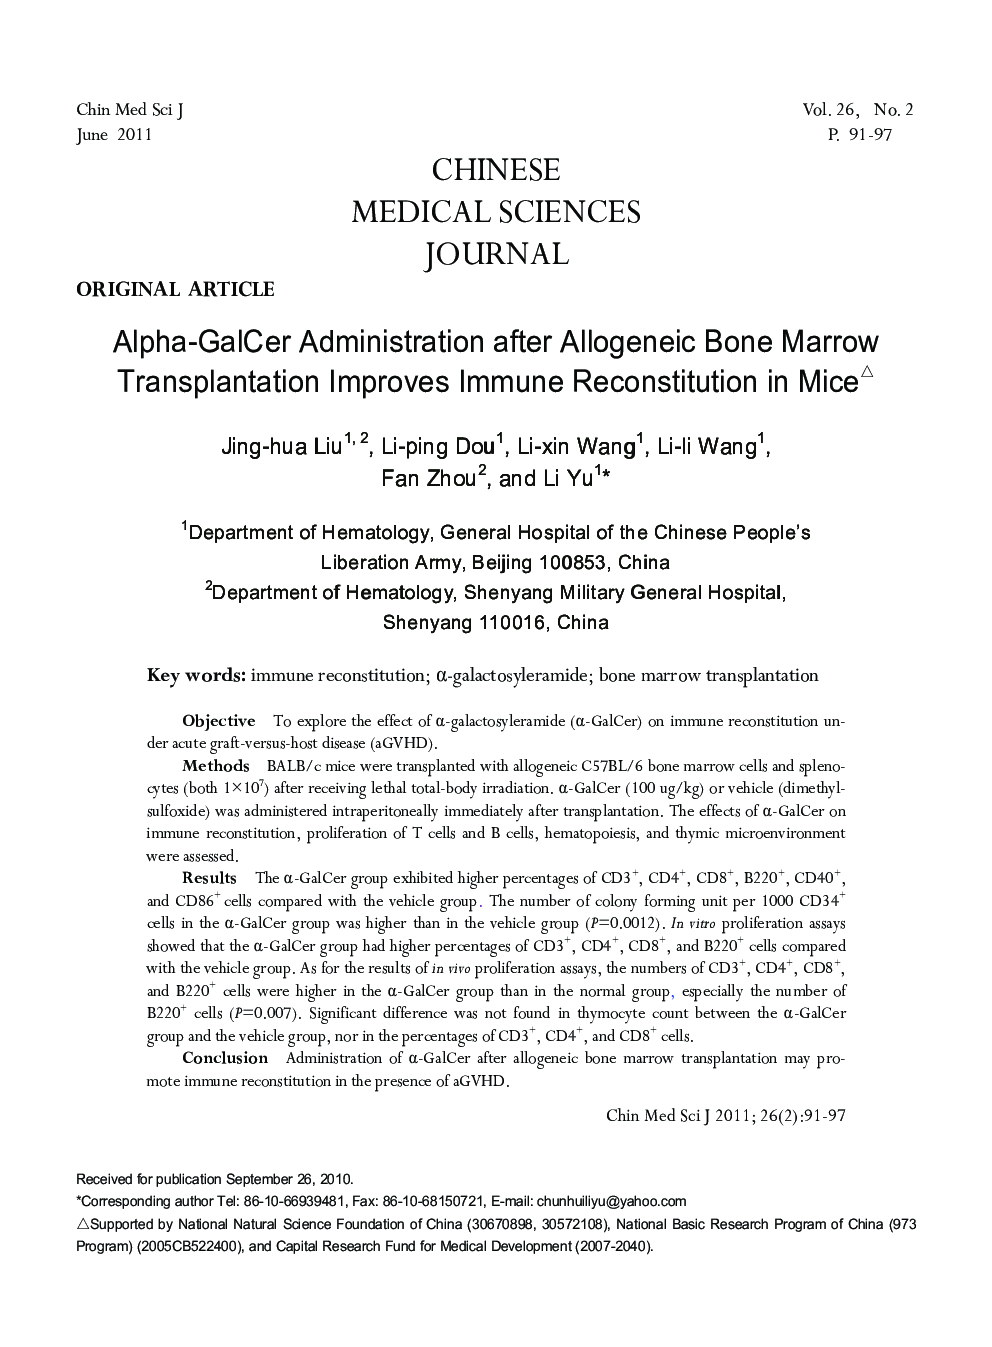 Alpha-GalCer Administration after Allogeneic Bone Marrow Transplantation Improves Immune Reconstitution in Mice 